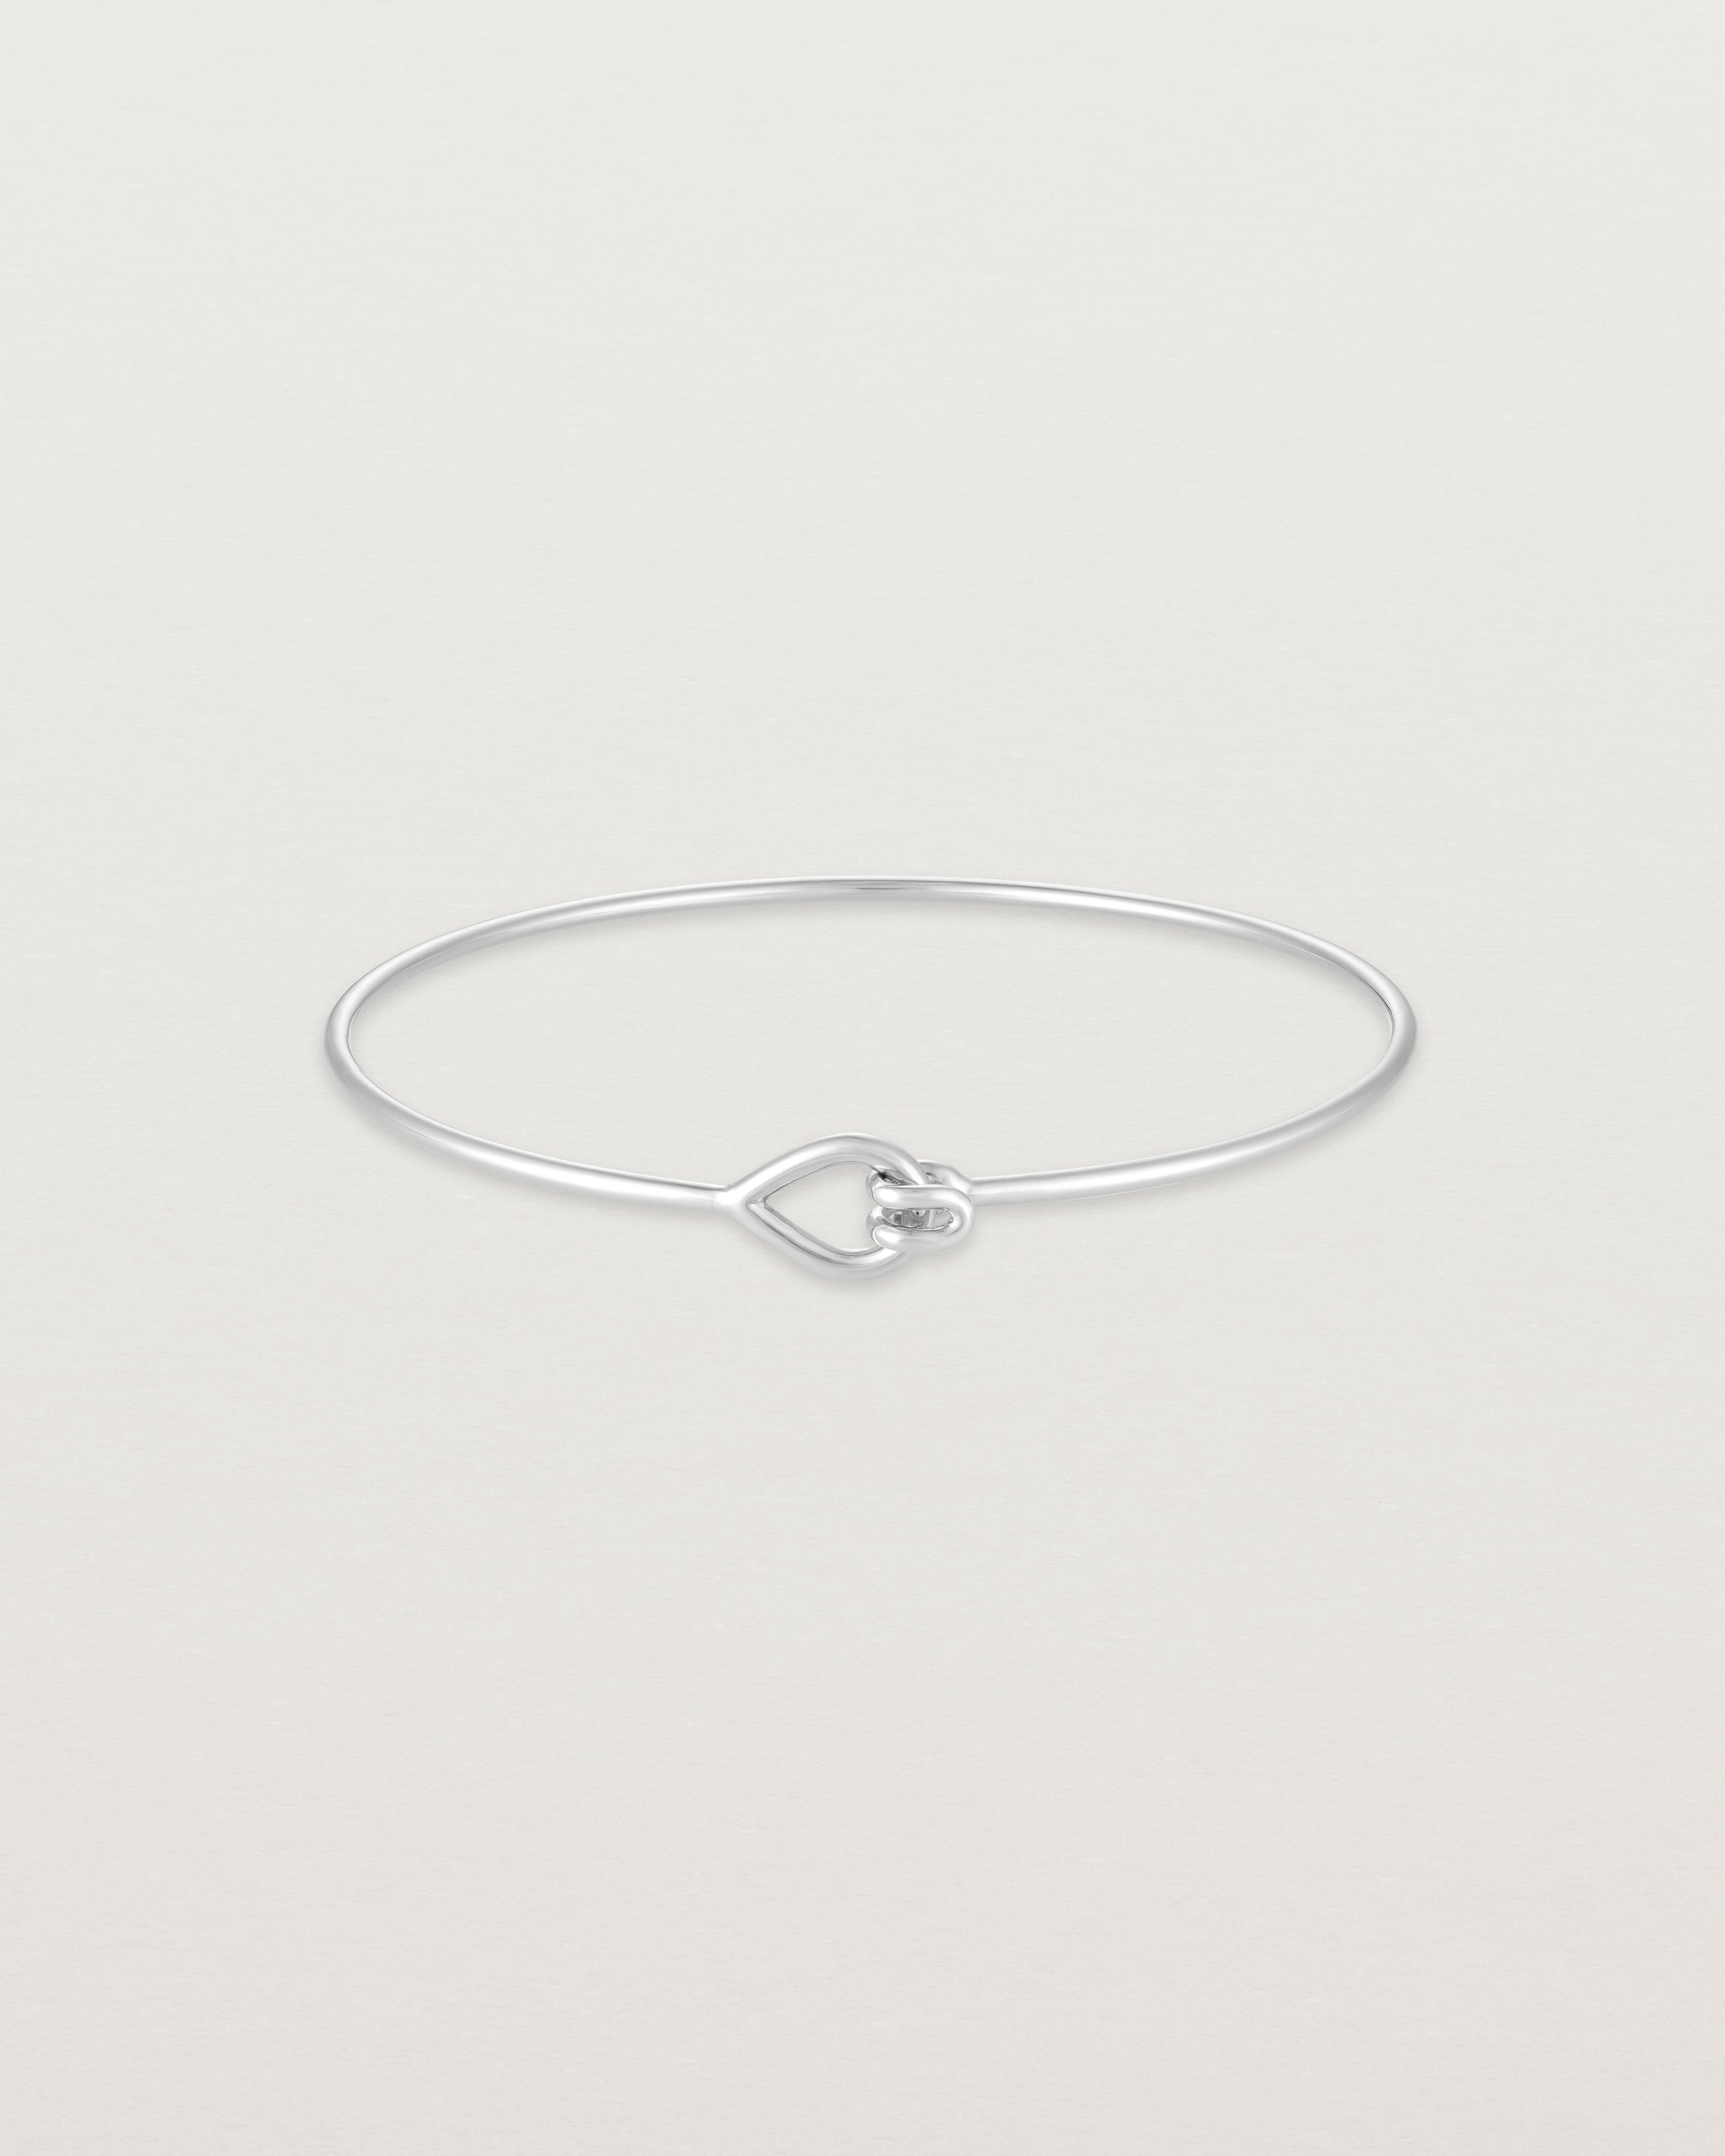 Front view of the Oana Bangle in sterling silver.